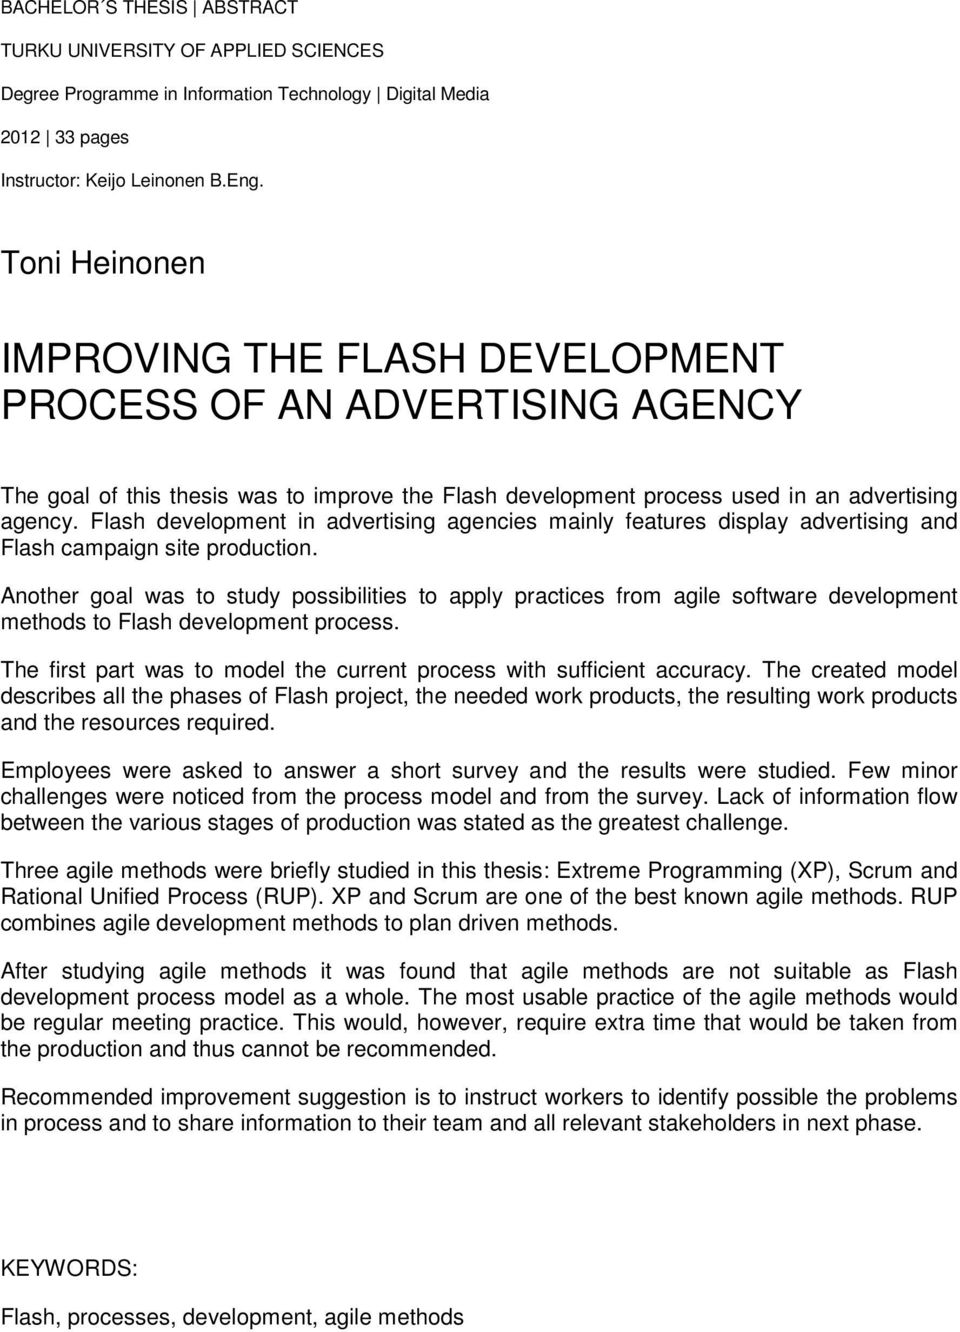 Flash development in advertising agencies mainly features display advertising and Flash campaign site production.